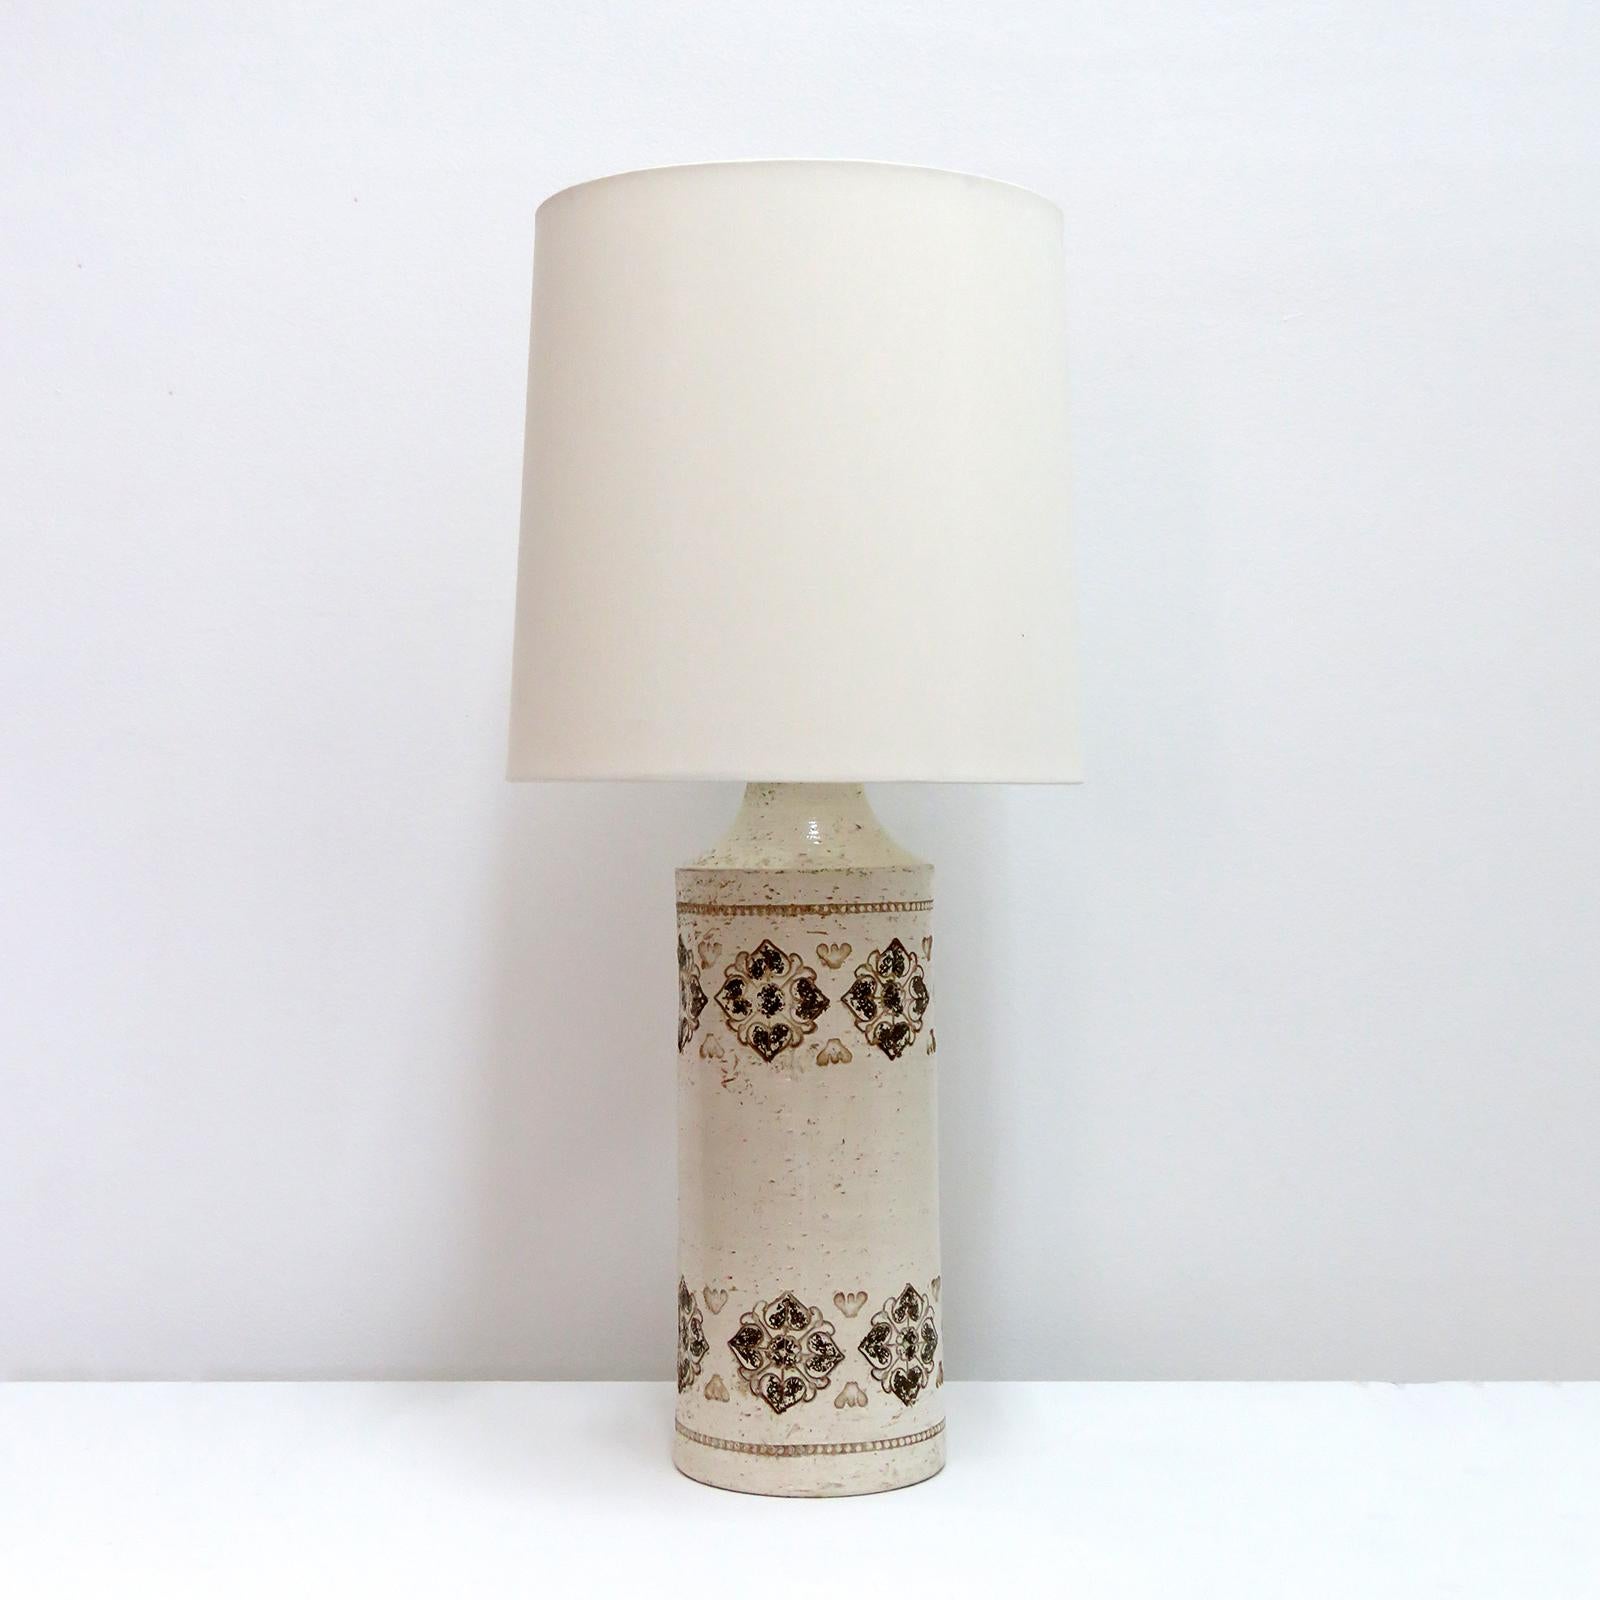 Wonderful glazed ceramic table lamp in a textured, off-white color with brown geometric decorations. marked 'Italy/Bergboms', Sweden, linen shade included, wired for US standards with on/off through switch at the socket, one E26 socket, max. wattage